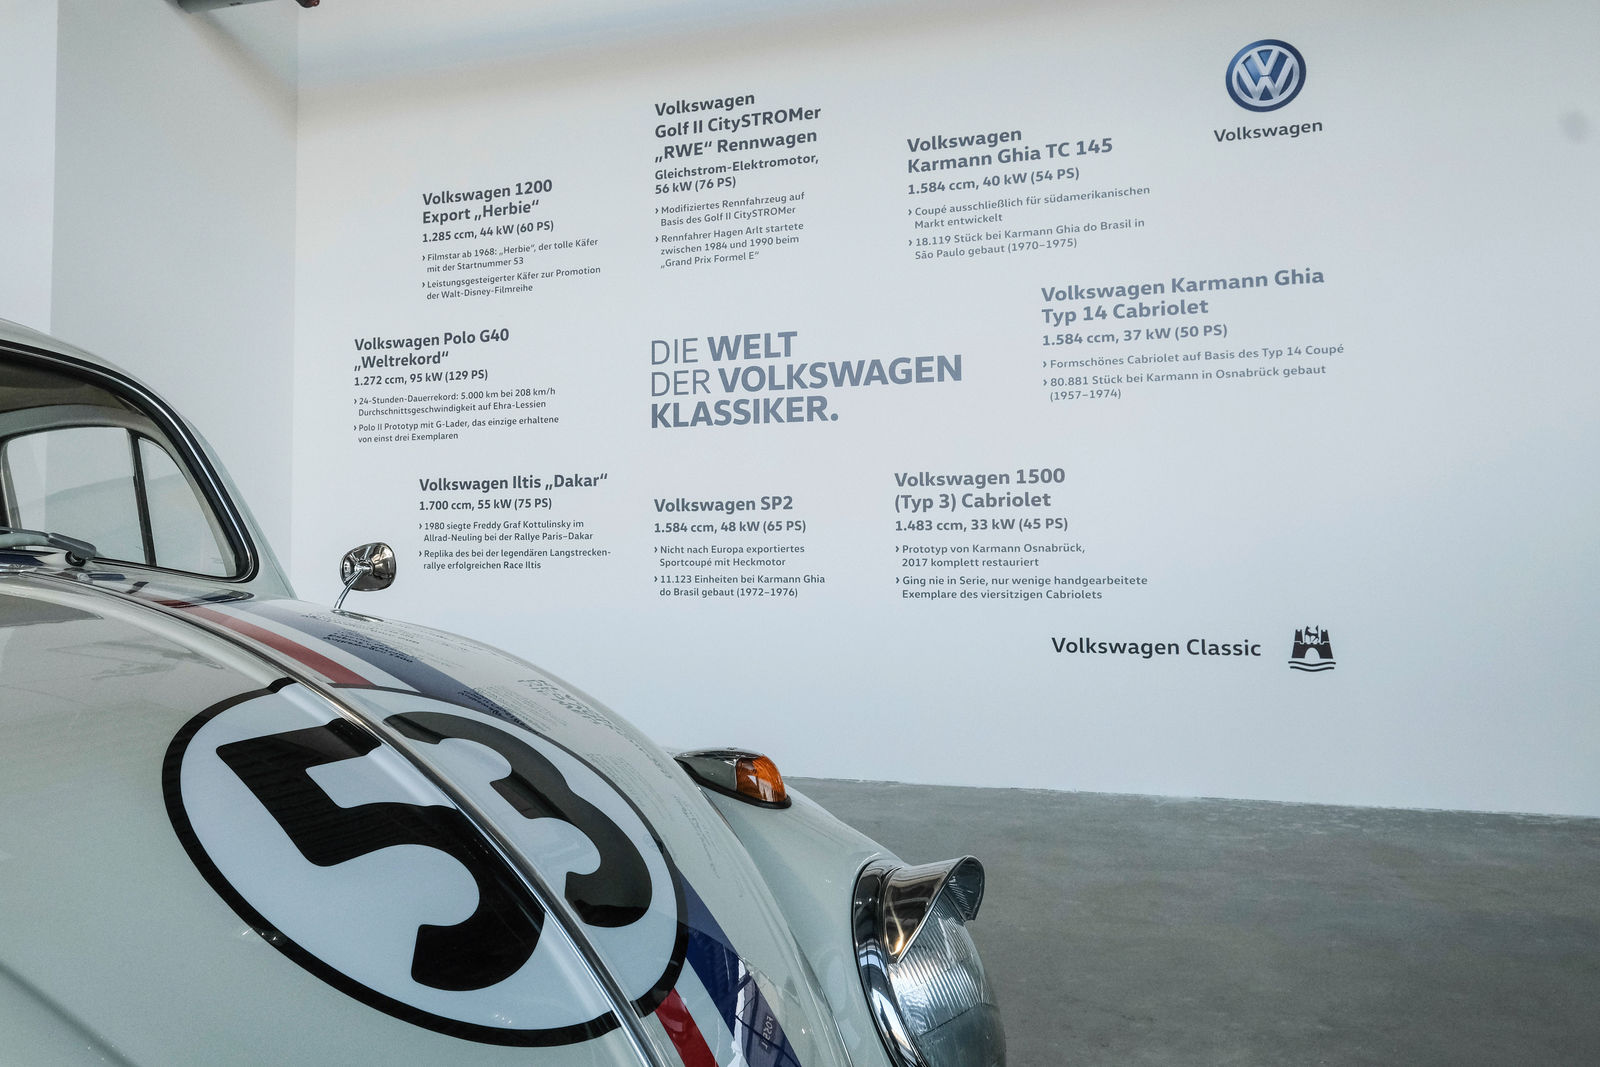 Exhibition “The world of Volkswagen classics” to open at the Designer Outlets Wolfsburg